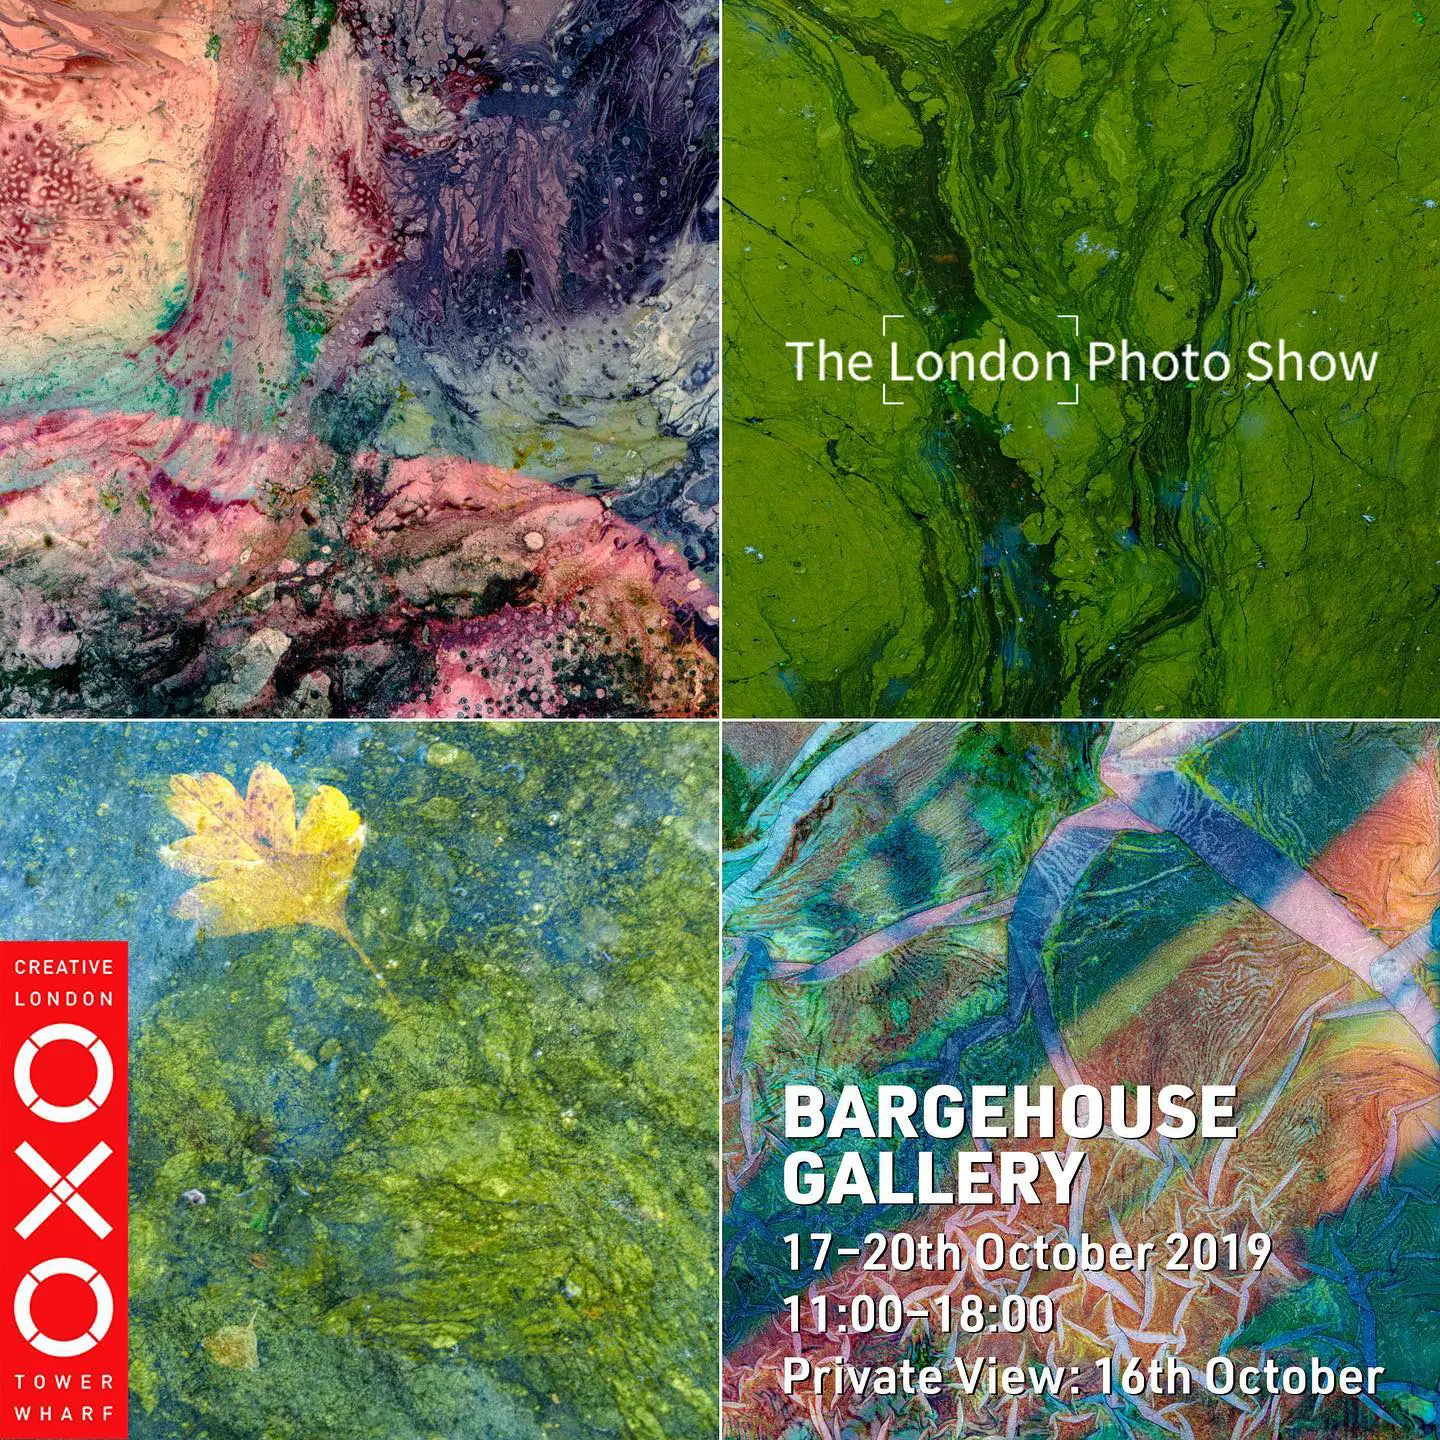 The London Photo Show